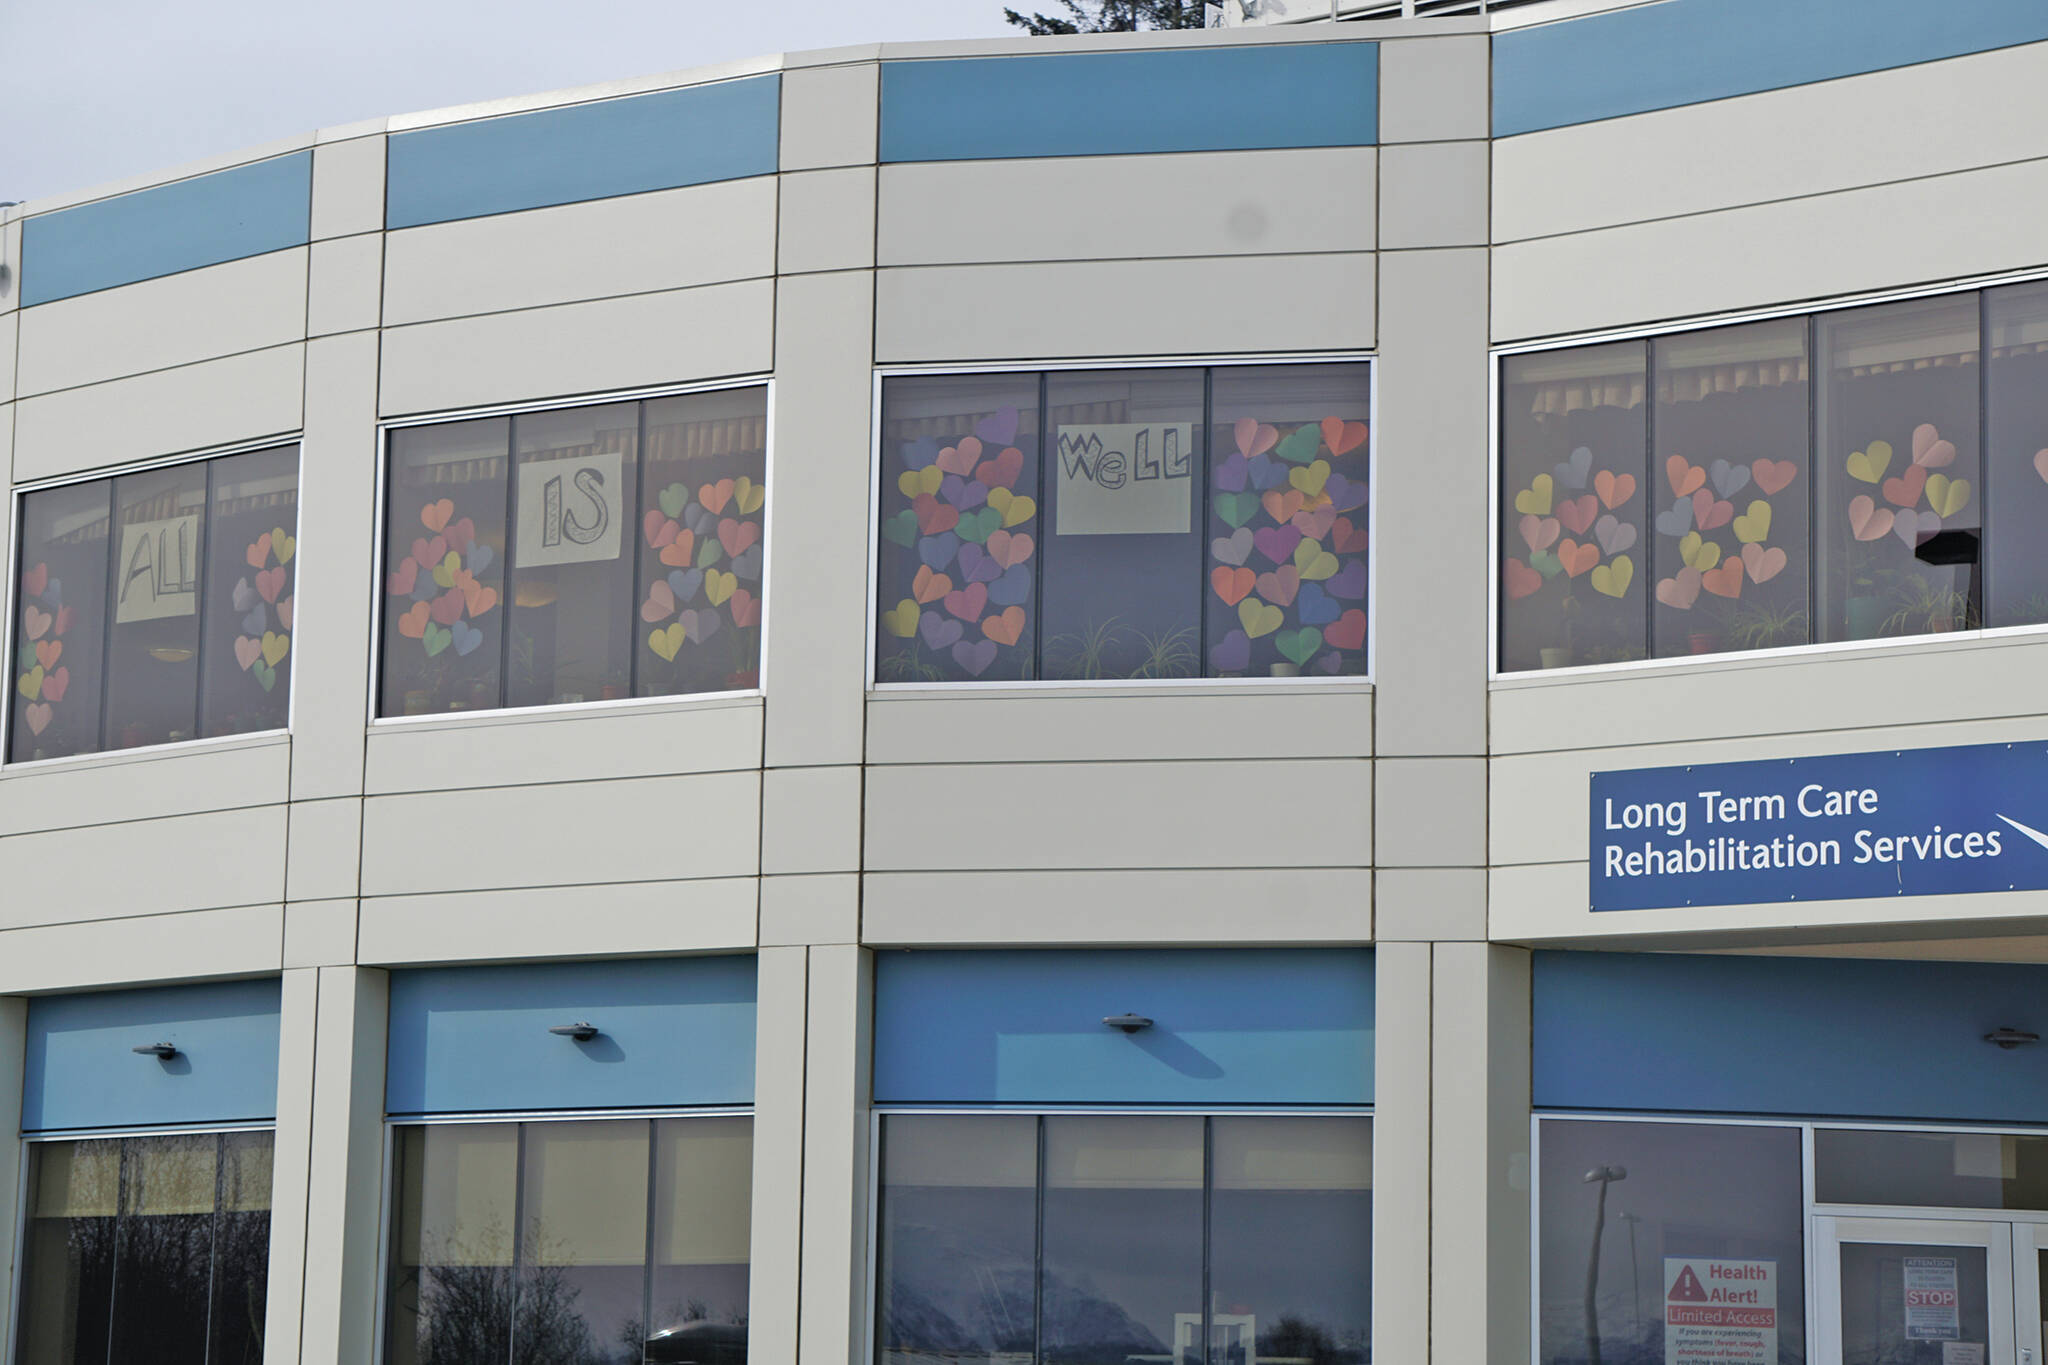 At the start of the COVID-19 pandemic in March of 2020, signs in the windows of the Long Term Care wing at South Peninsula Hospital in Homer, Alaska, say “All is well.” (Photo by Michael Armstrong/Homer News)